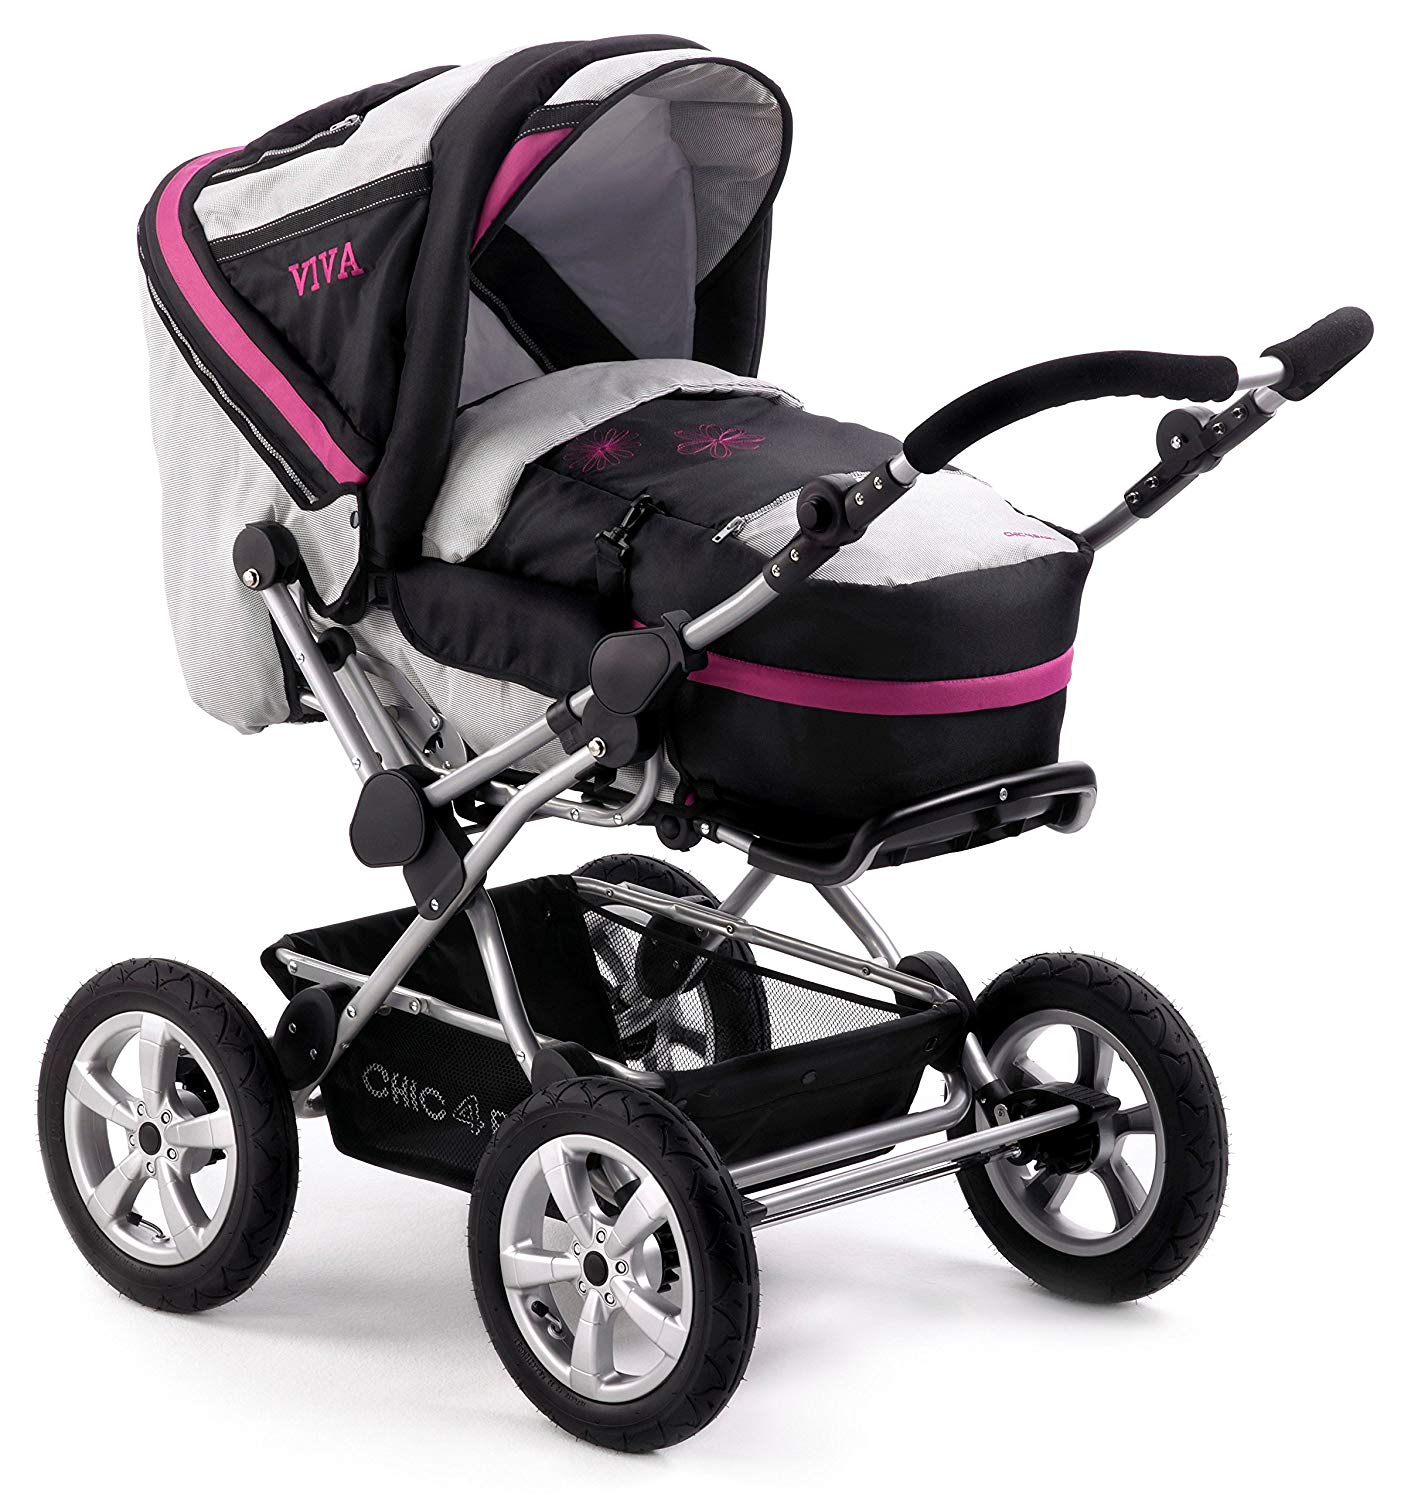 Chic 4 Baby Viva 100 A33 Travel System with Carry Bag and Seat Office Racer Chair Fuchsia